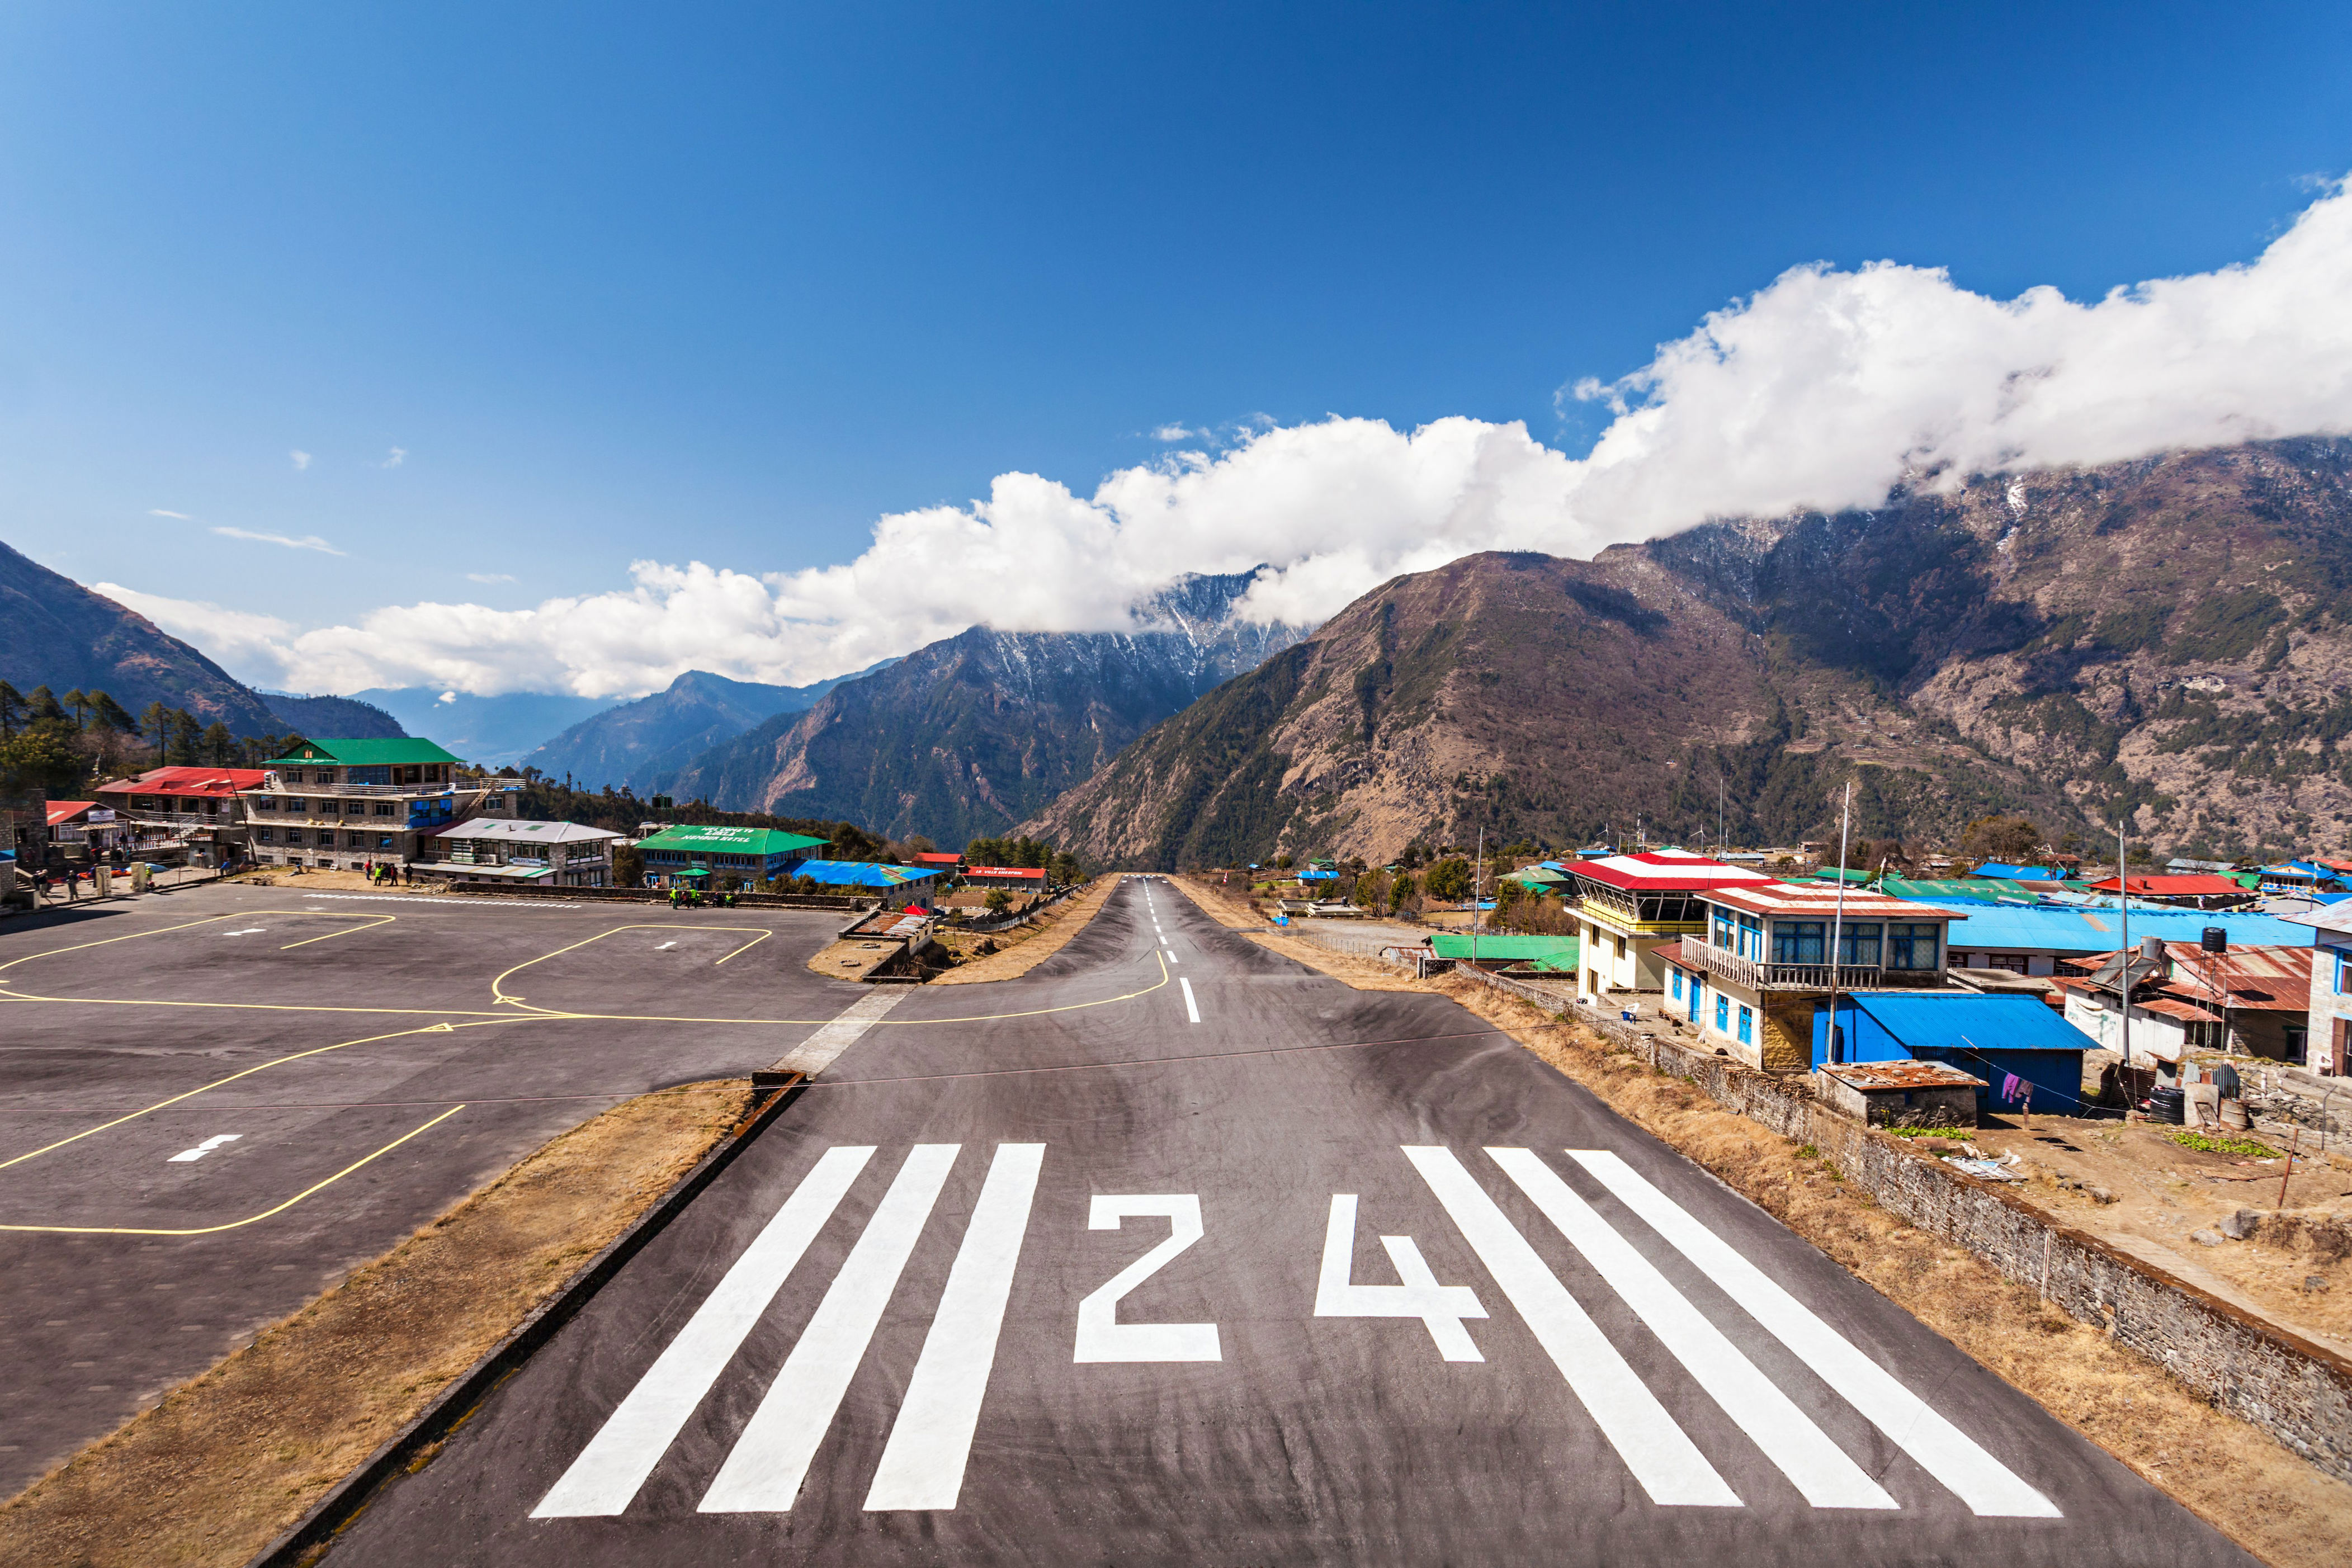 lukla: 5 fast facts about the world's most dangerous airport